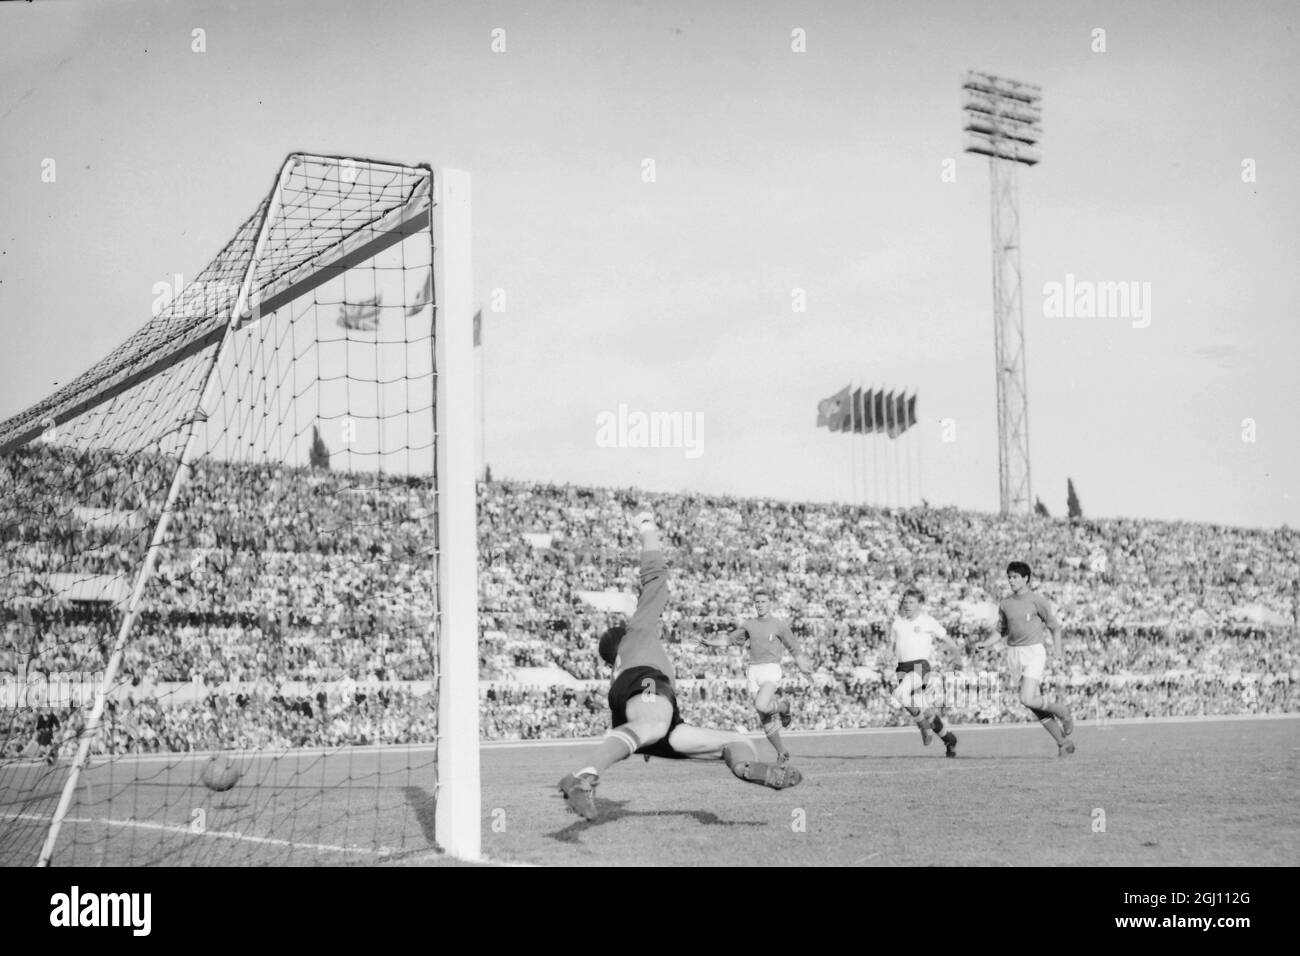 FOOTBALL ENGLAND V ITALY GOALIE CANT STOP ENGLANDS JIMMY GREAVES FROM SCORING 25 MAY 1961 Stock Photo